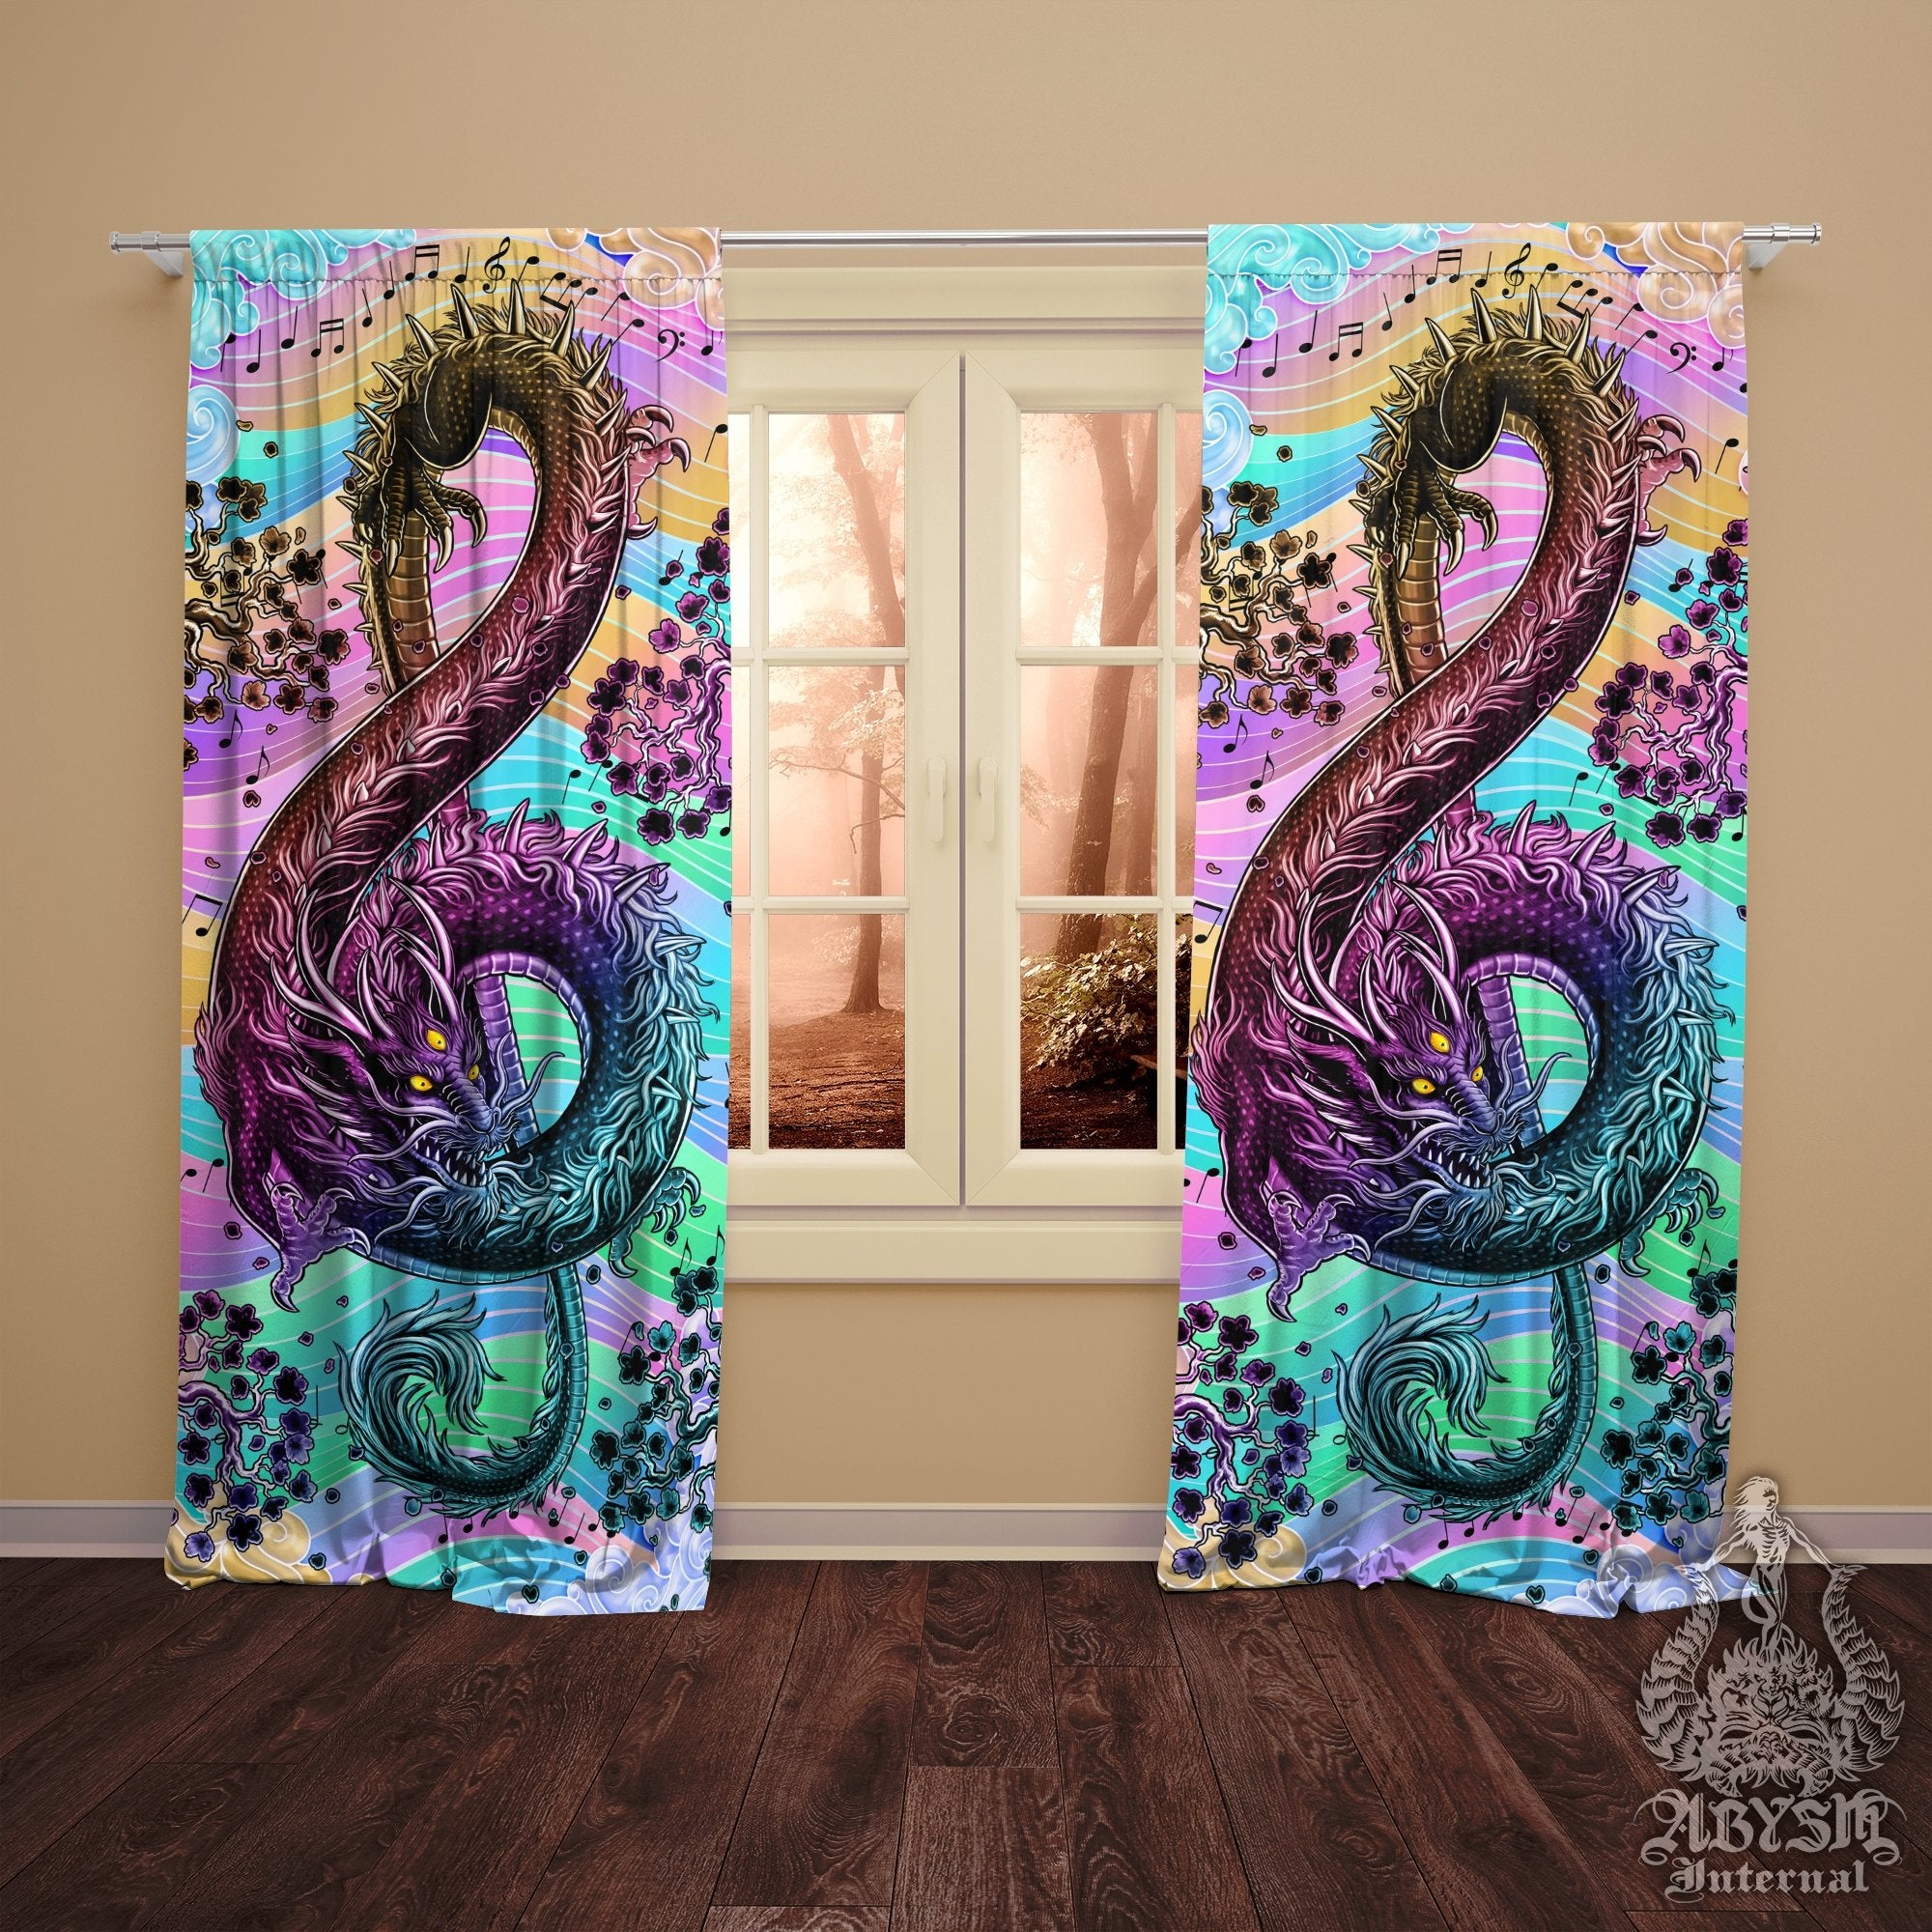 Music Blackout Curtains, Long Window Panels, Treble Clef, Music Art Print, Kawaii Gamer Room Decor, Funky and Eclectic Home Decor - Pastel Punk Black Dragon - Abysm Internal